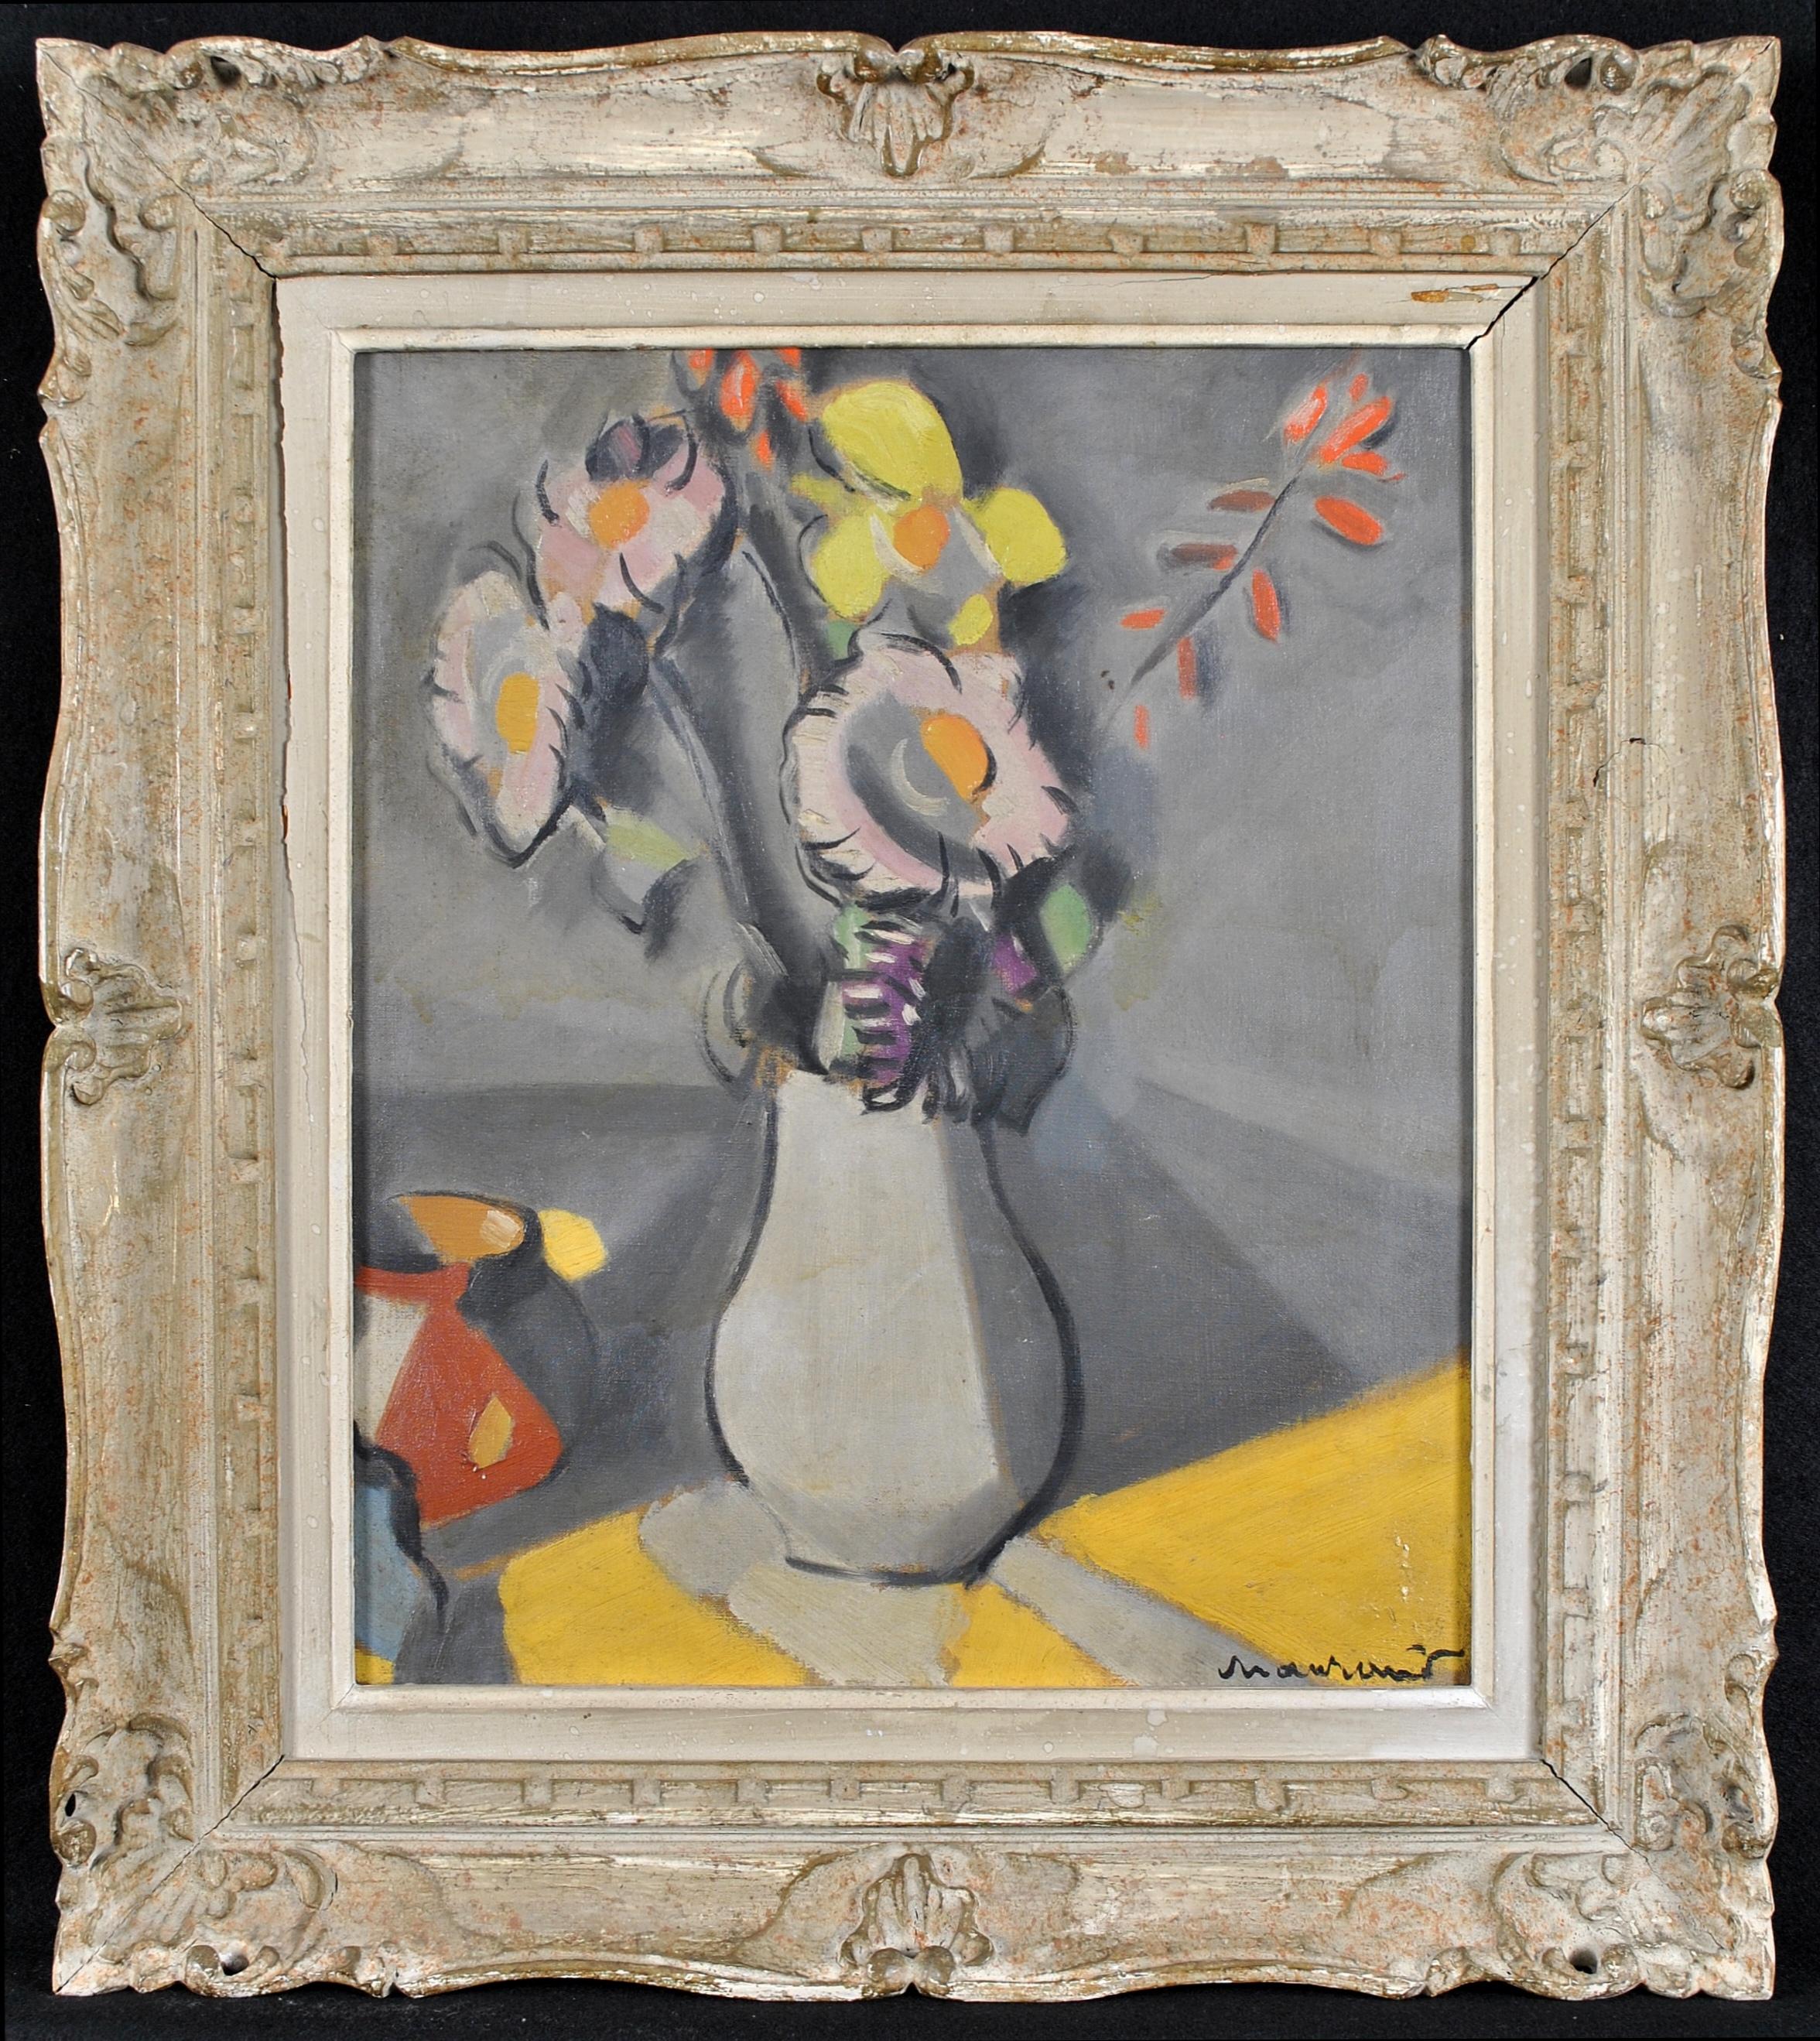 Early 20th Century French School Still-Life Painting - Flowers in a Vase - French Post Impressionist Still Life Oil on Board Painting